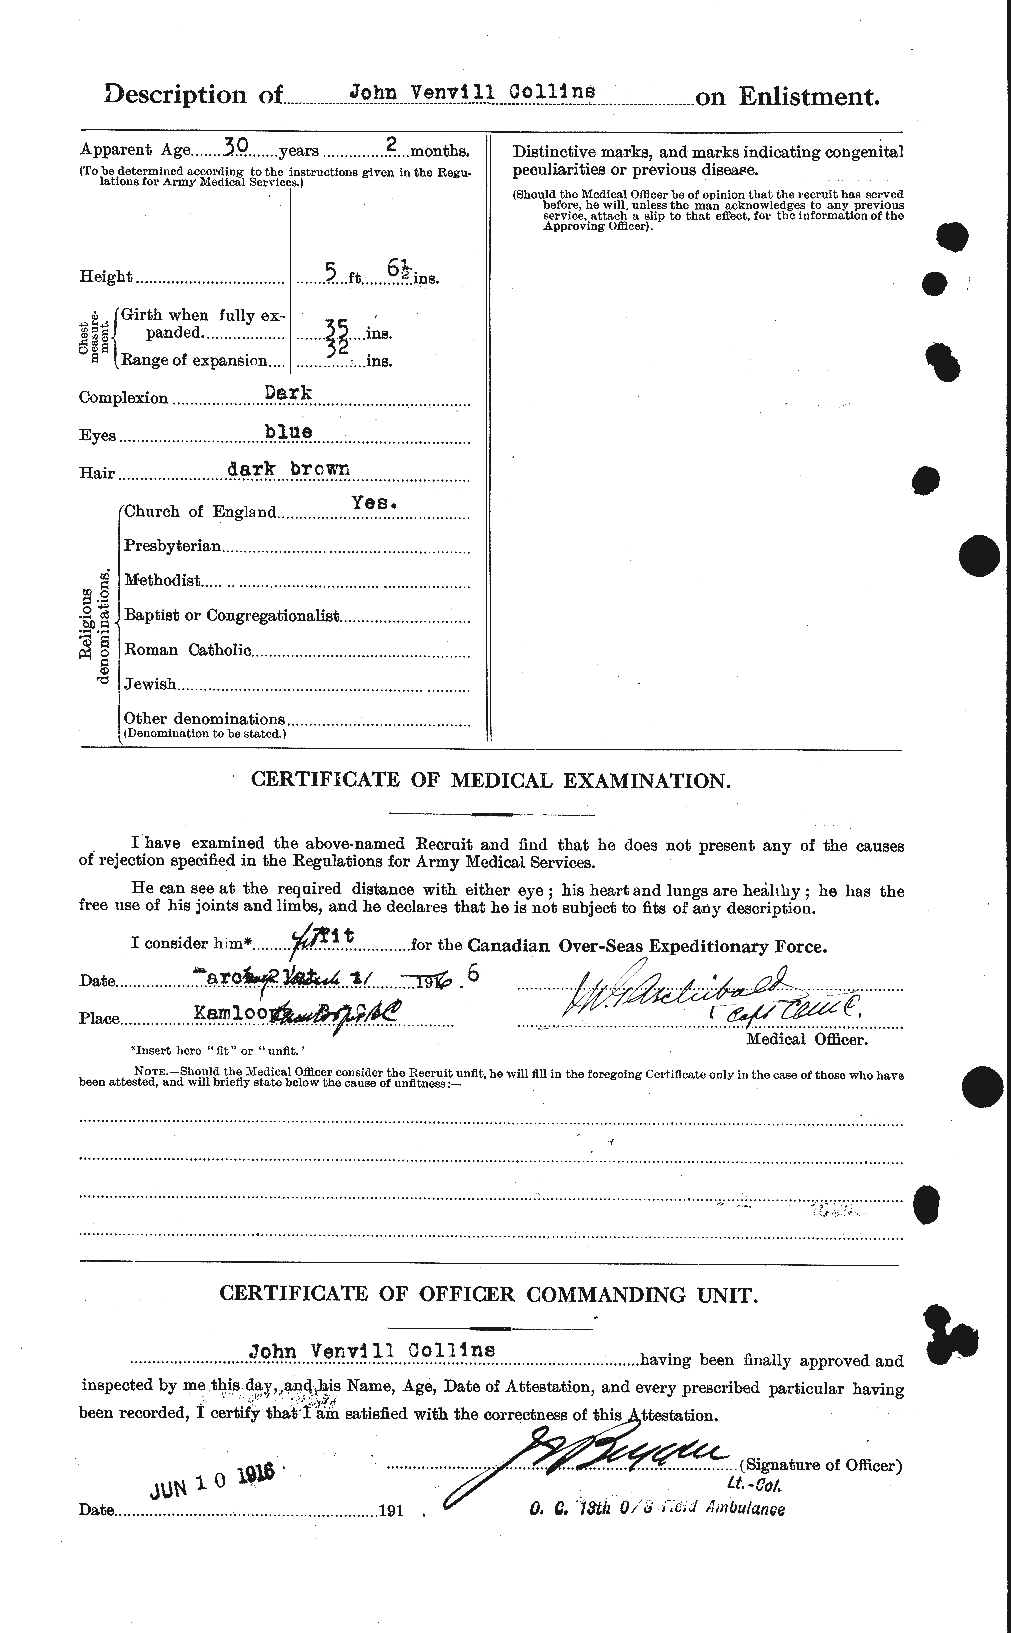 Personnel Records of the First World War - CEF 069534b